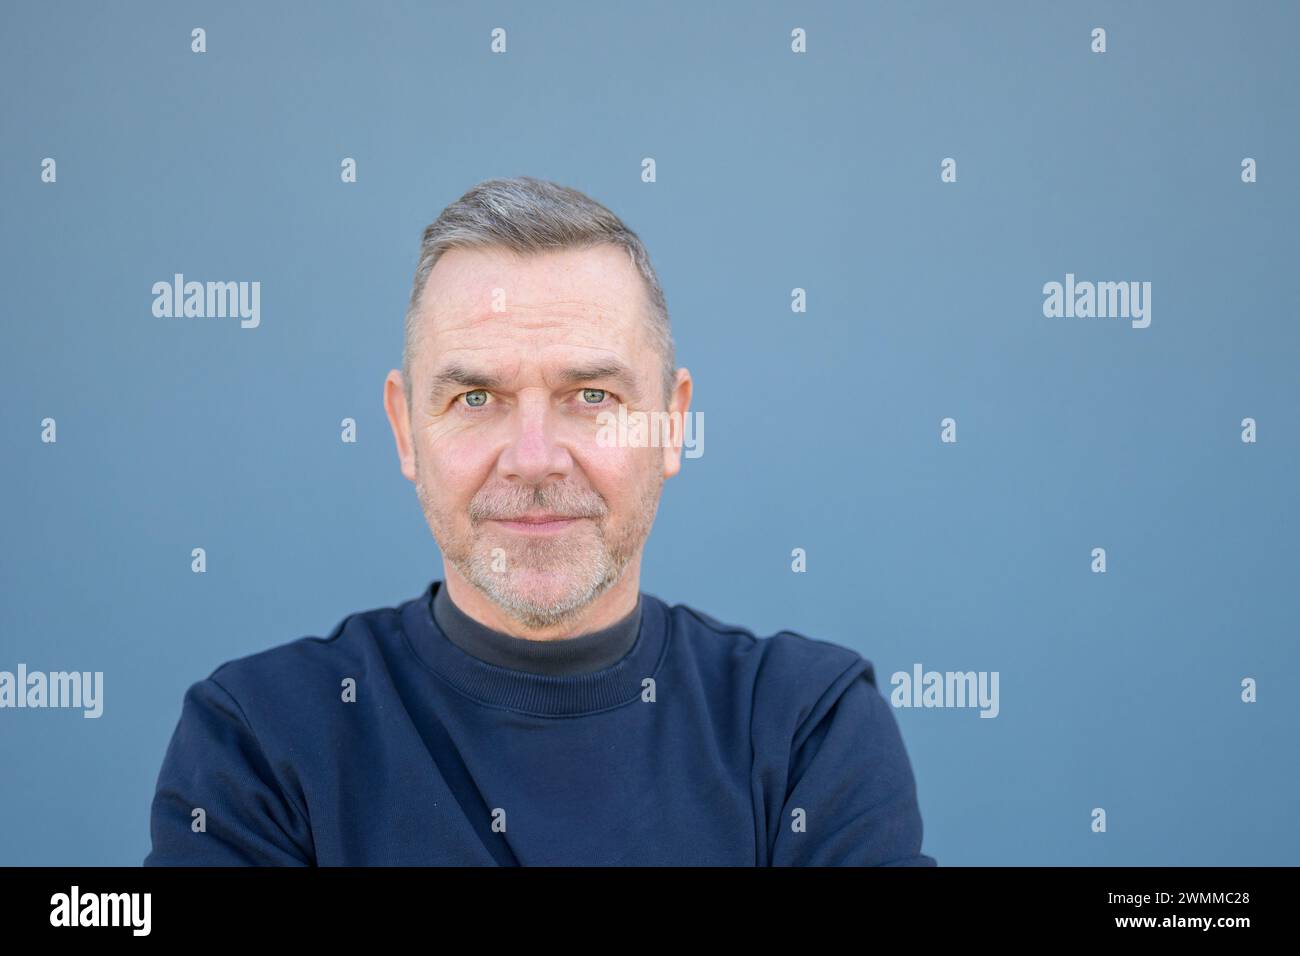 Close up portrait of a middle aged man looking doubtfully or scared at the camera with wide eyes wearing a blue sweater Stock Photo